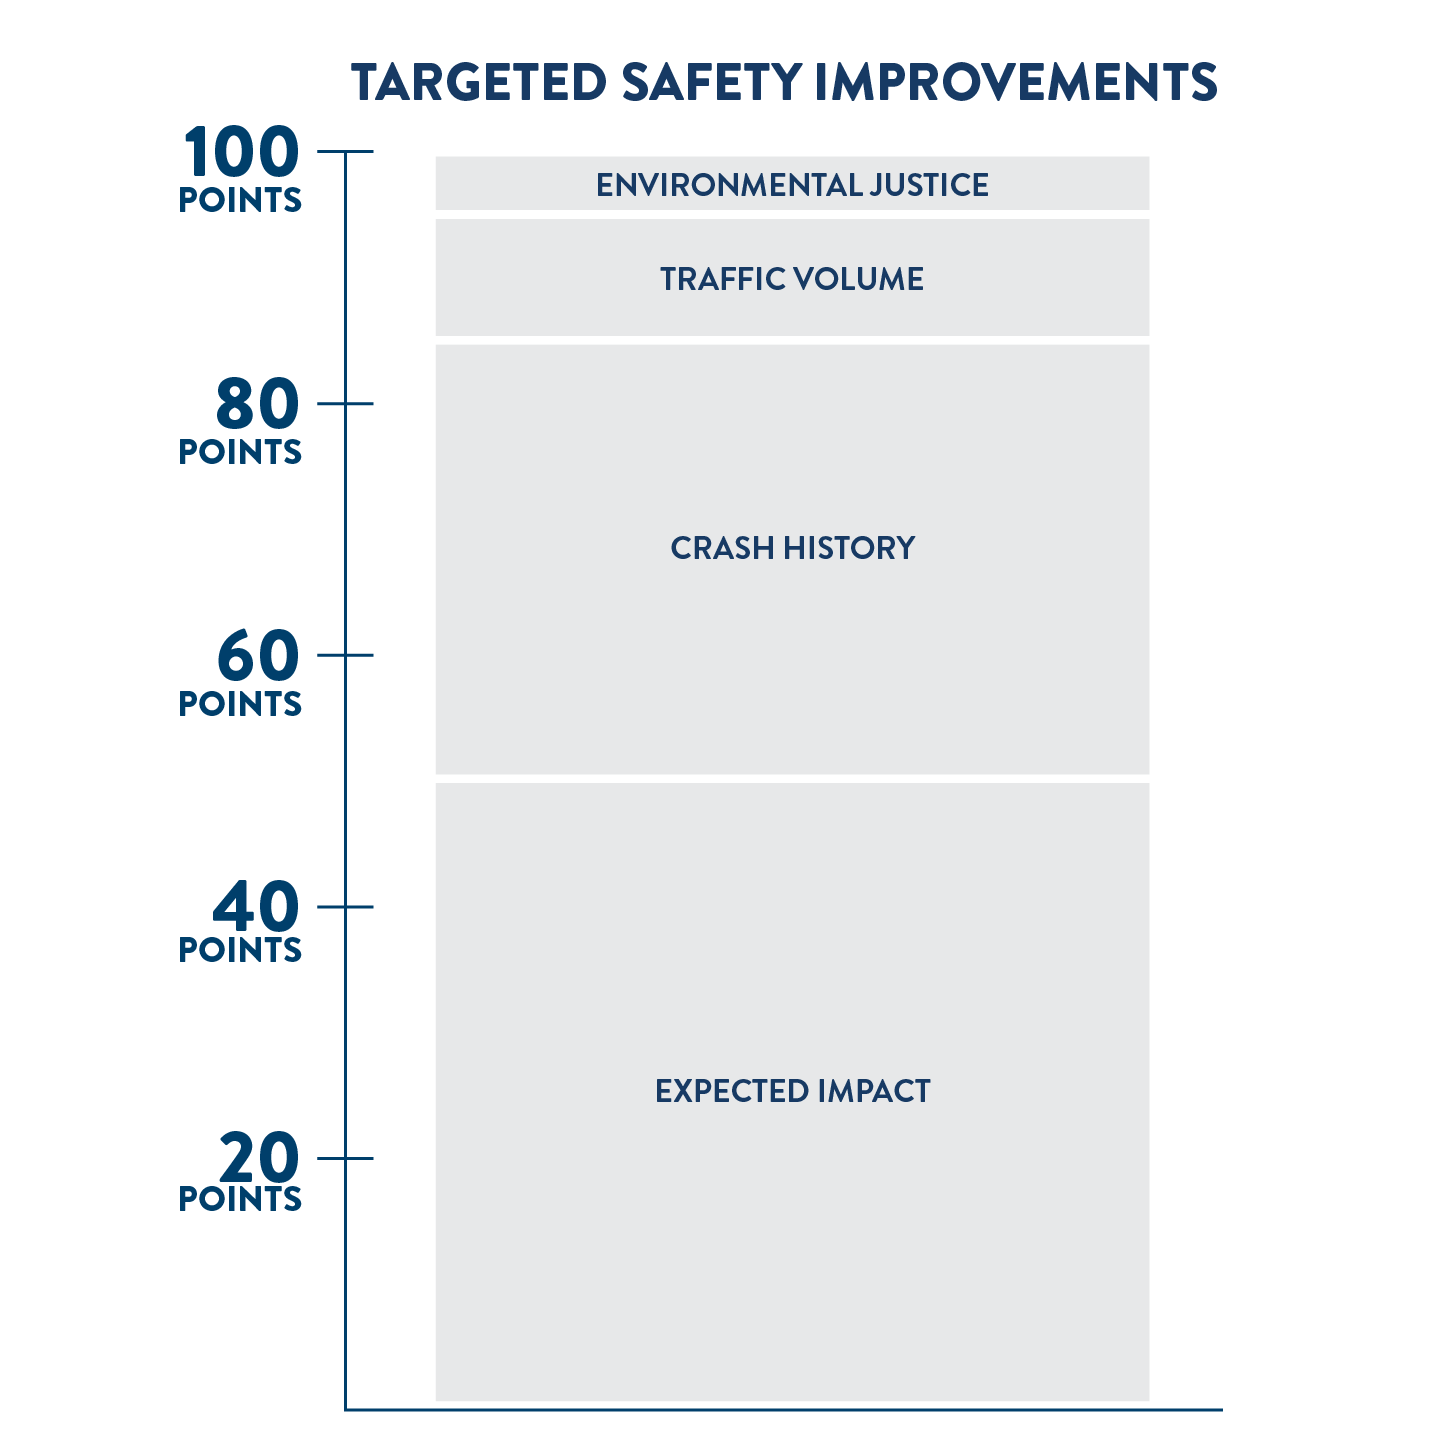 Scoring criteria for standalone targeted safety projects. Out of 100 possible points, 50 points are based on the expected impact, 35 points are based on the crash history, 10 points are based on traffic volume, and 5 points are based on whether the project will benefit an environmental justice population.